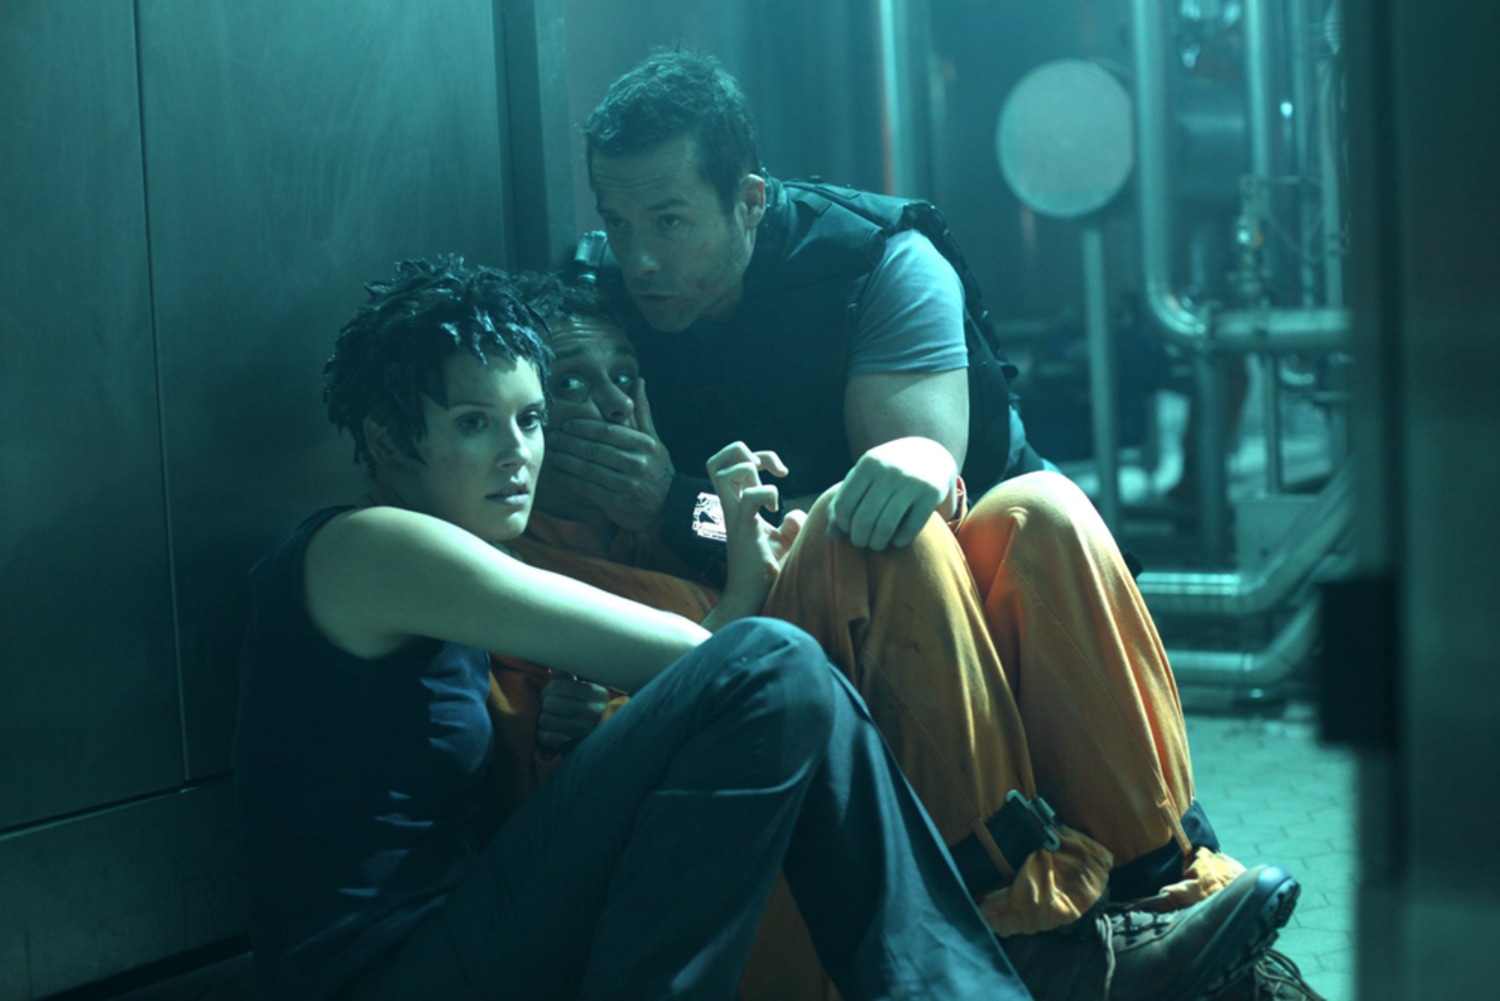 Lockout with Guy Pearce: Great little scifi-action flick!